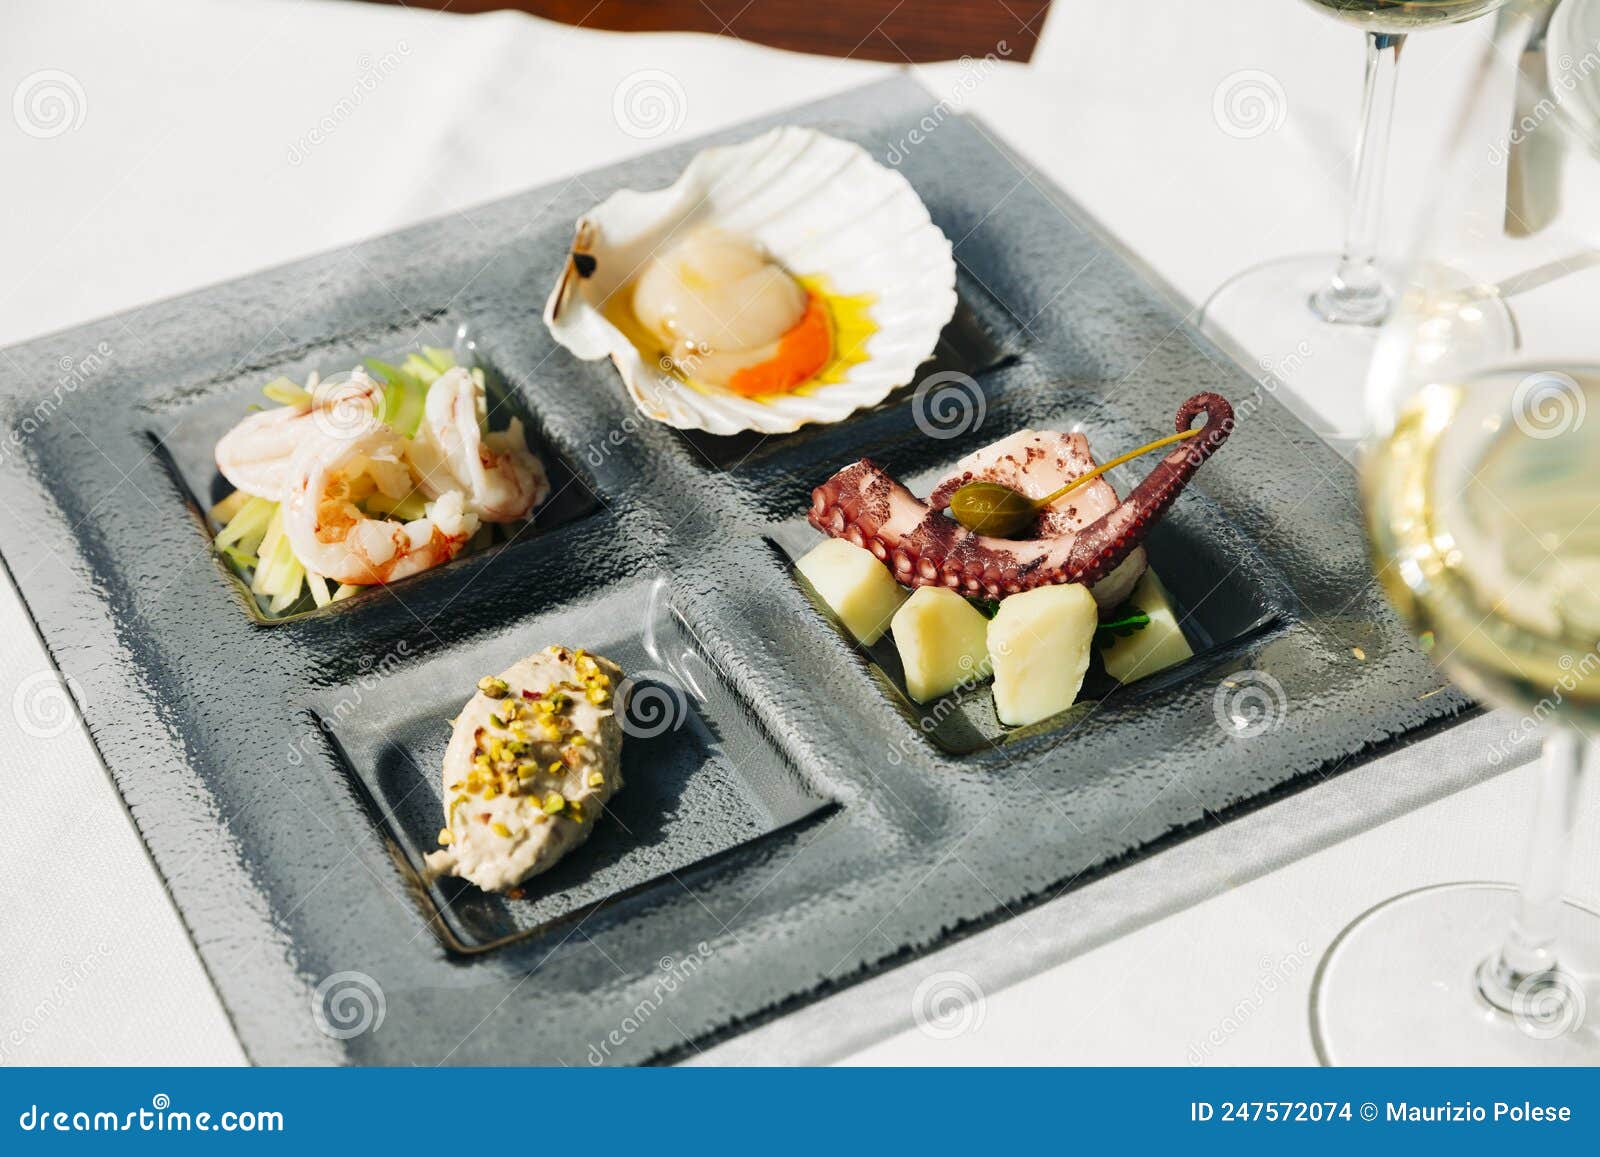 venetian cicchetti with shrimps, scallop, octopus and potatoes, and sea bass